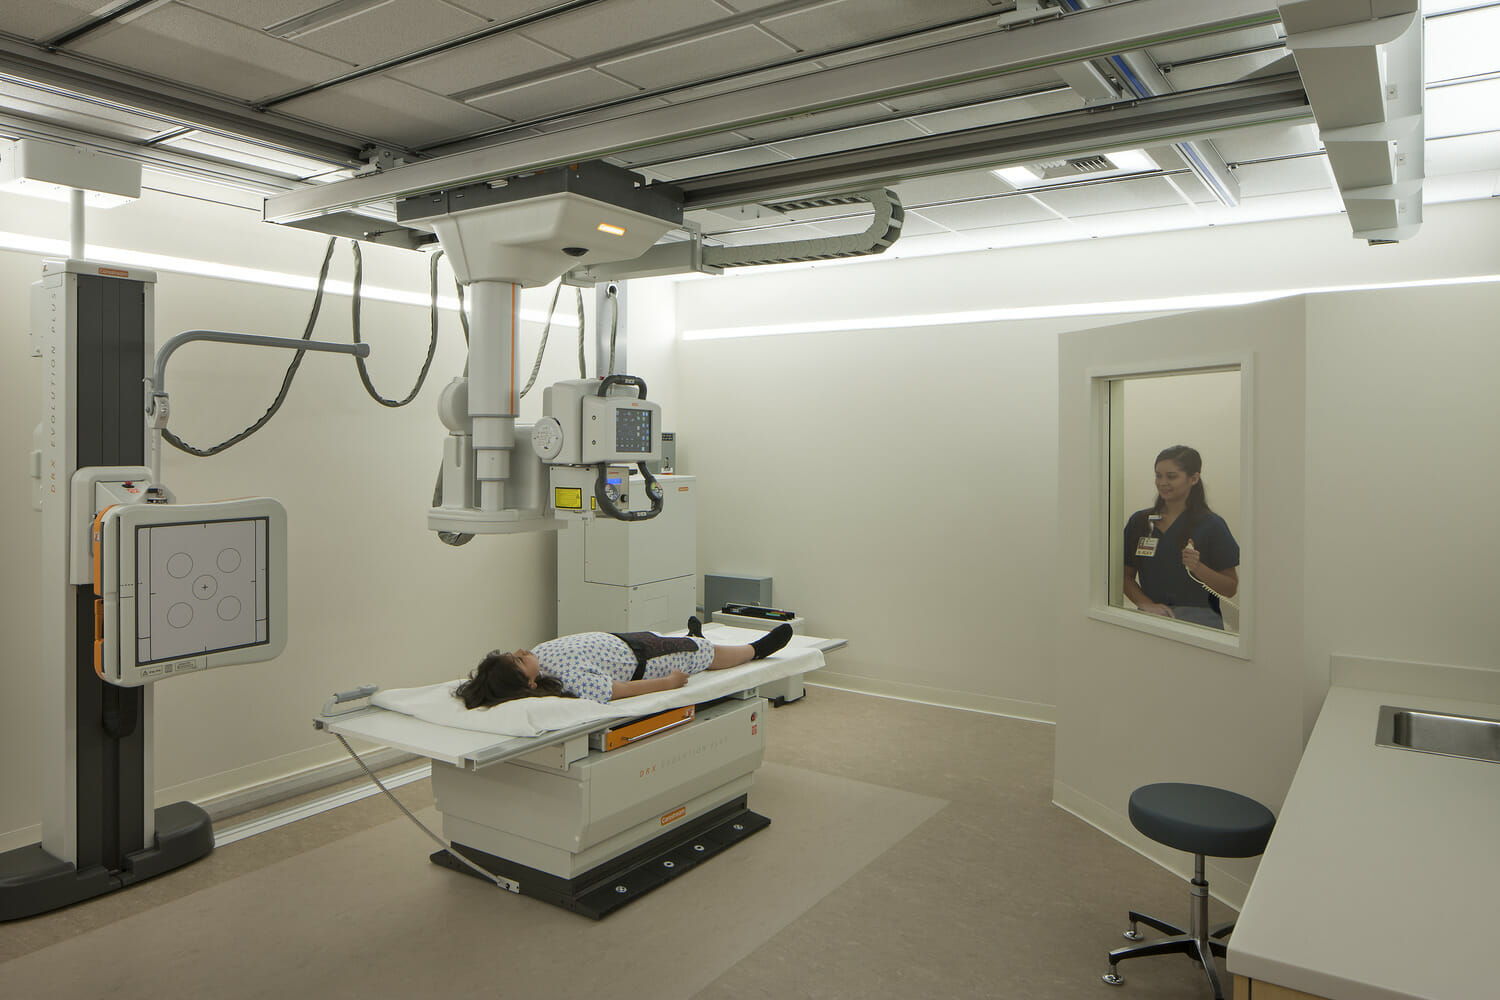 A person laying on a bed in a medical room.